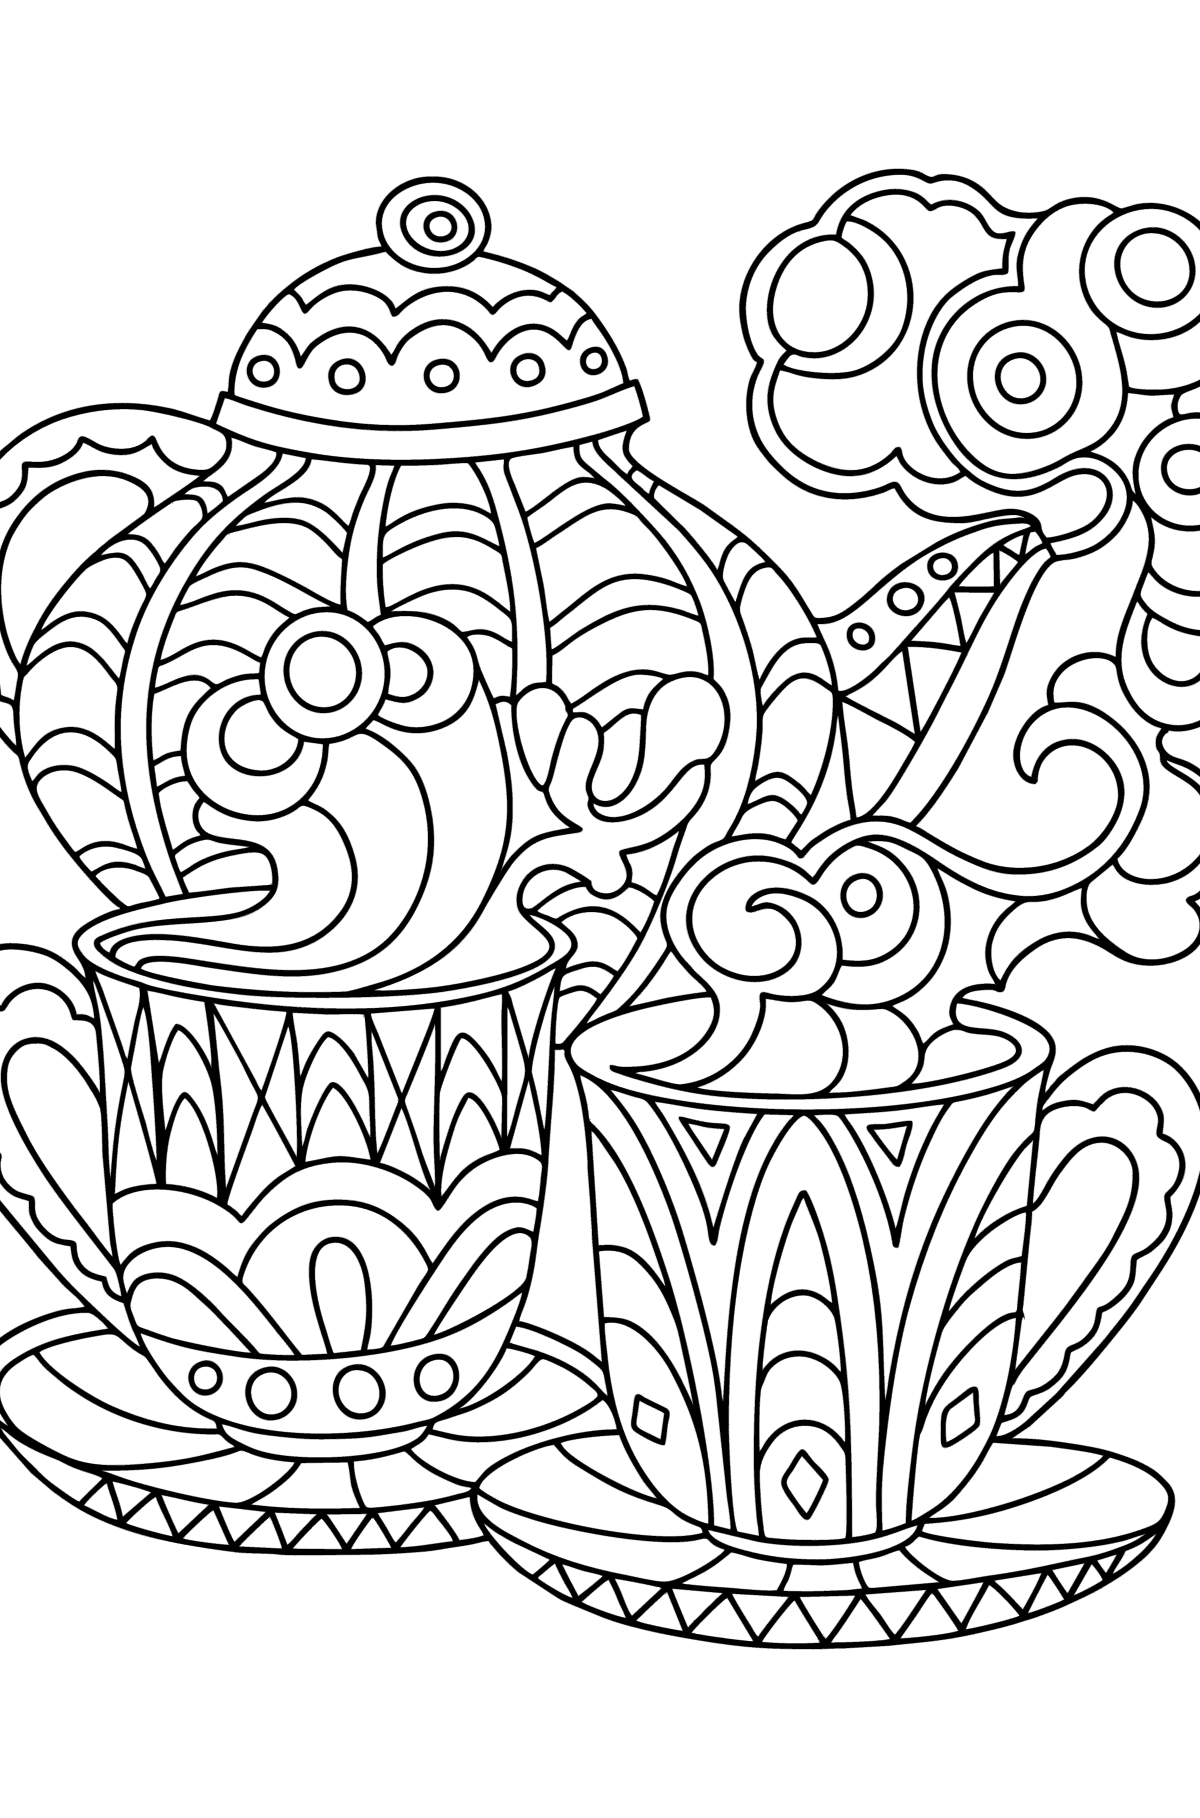 Doodle Coloring Page for Kids - Tea Party - Coloring Pages for Kids